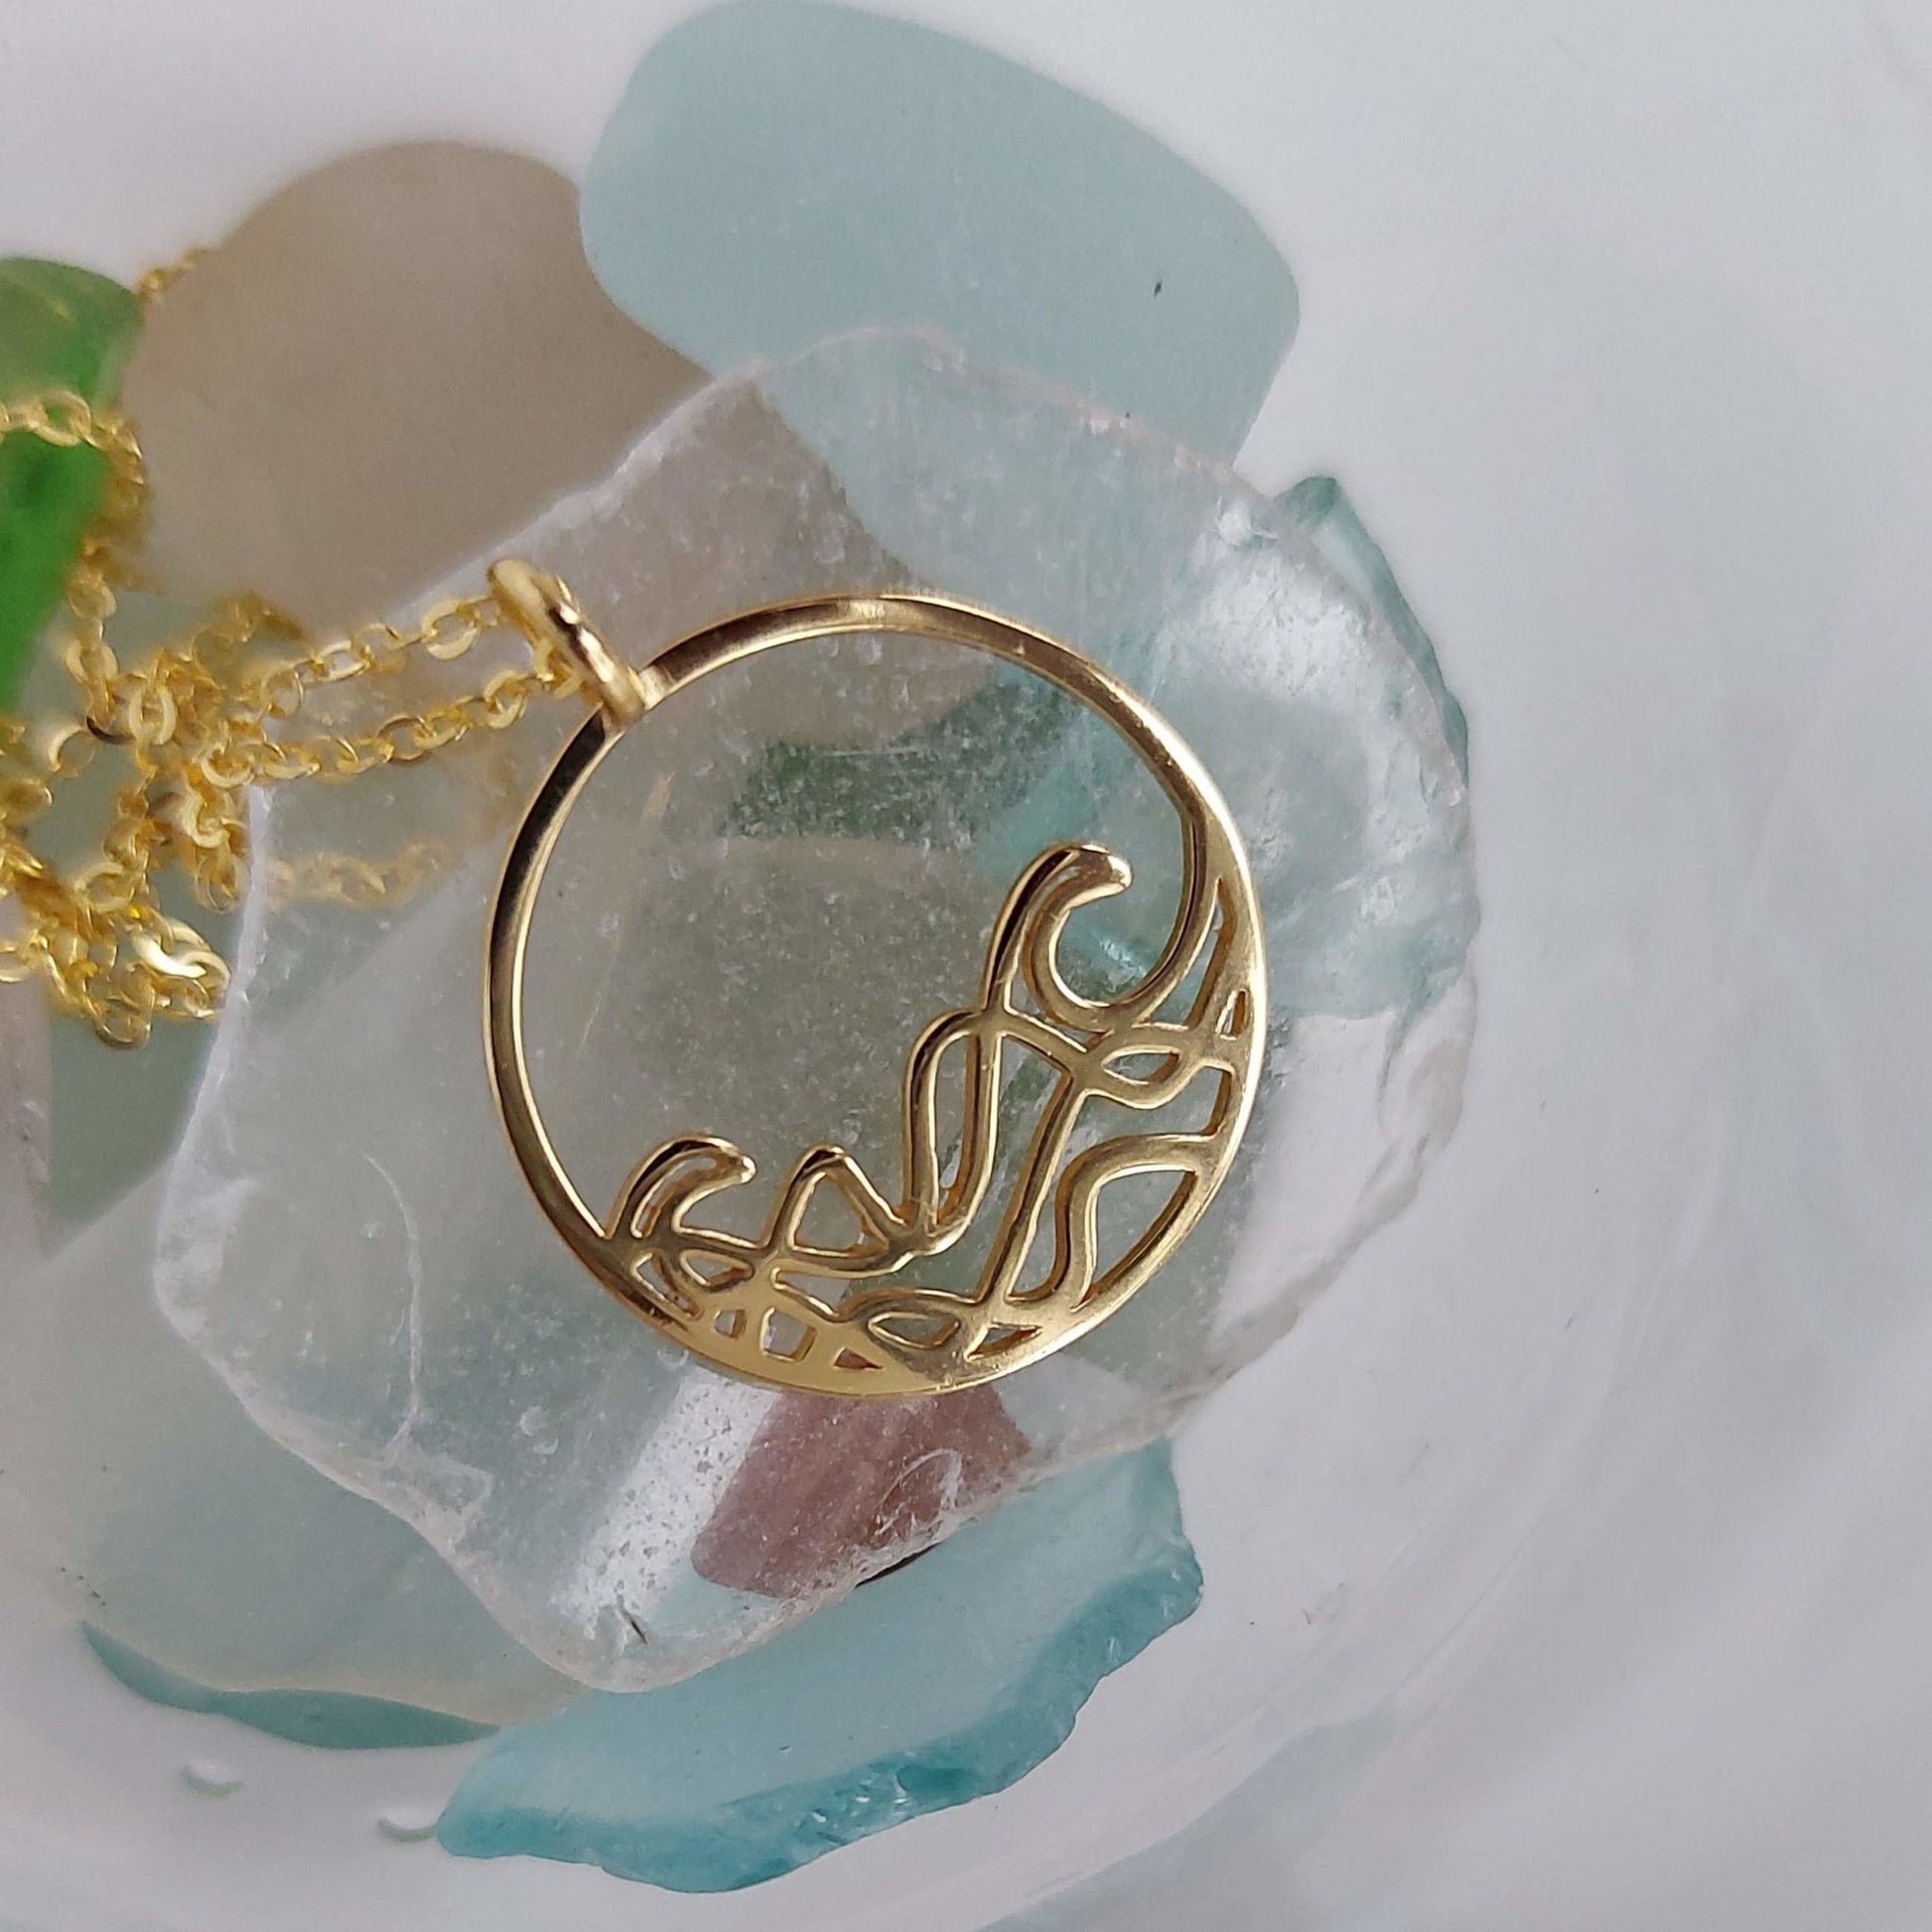 18k gold plated Petite Sombrio Ocean jewelry, Circle Necklace shown with sea glass, surf necklace, wave necklace